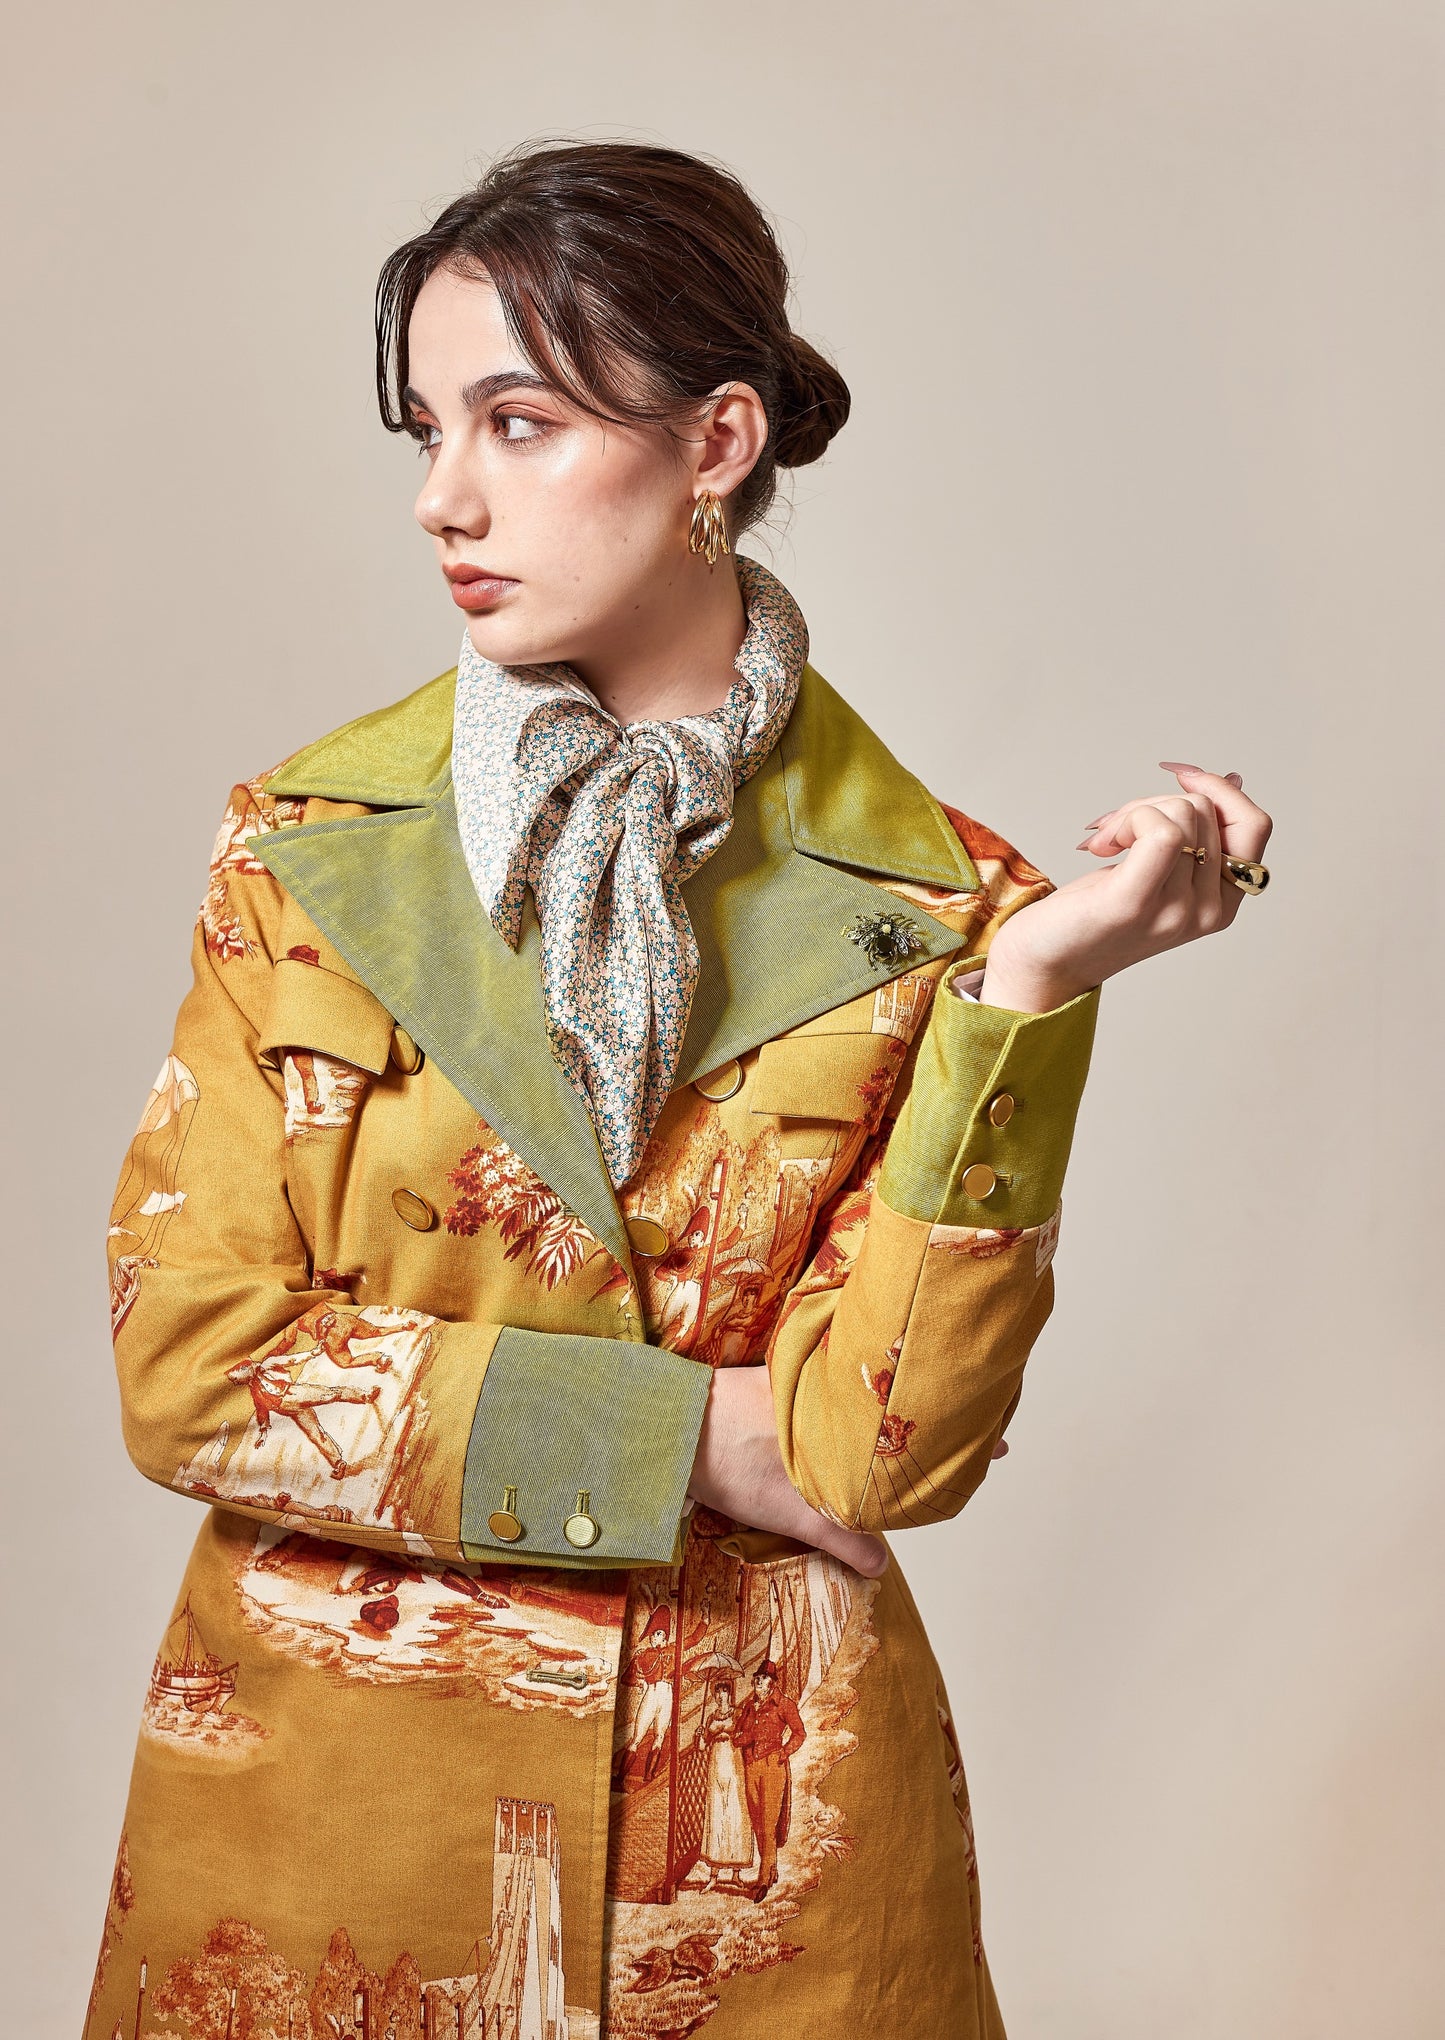 Toile de Jouy printed cotton double-breasted coat*Made to order